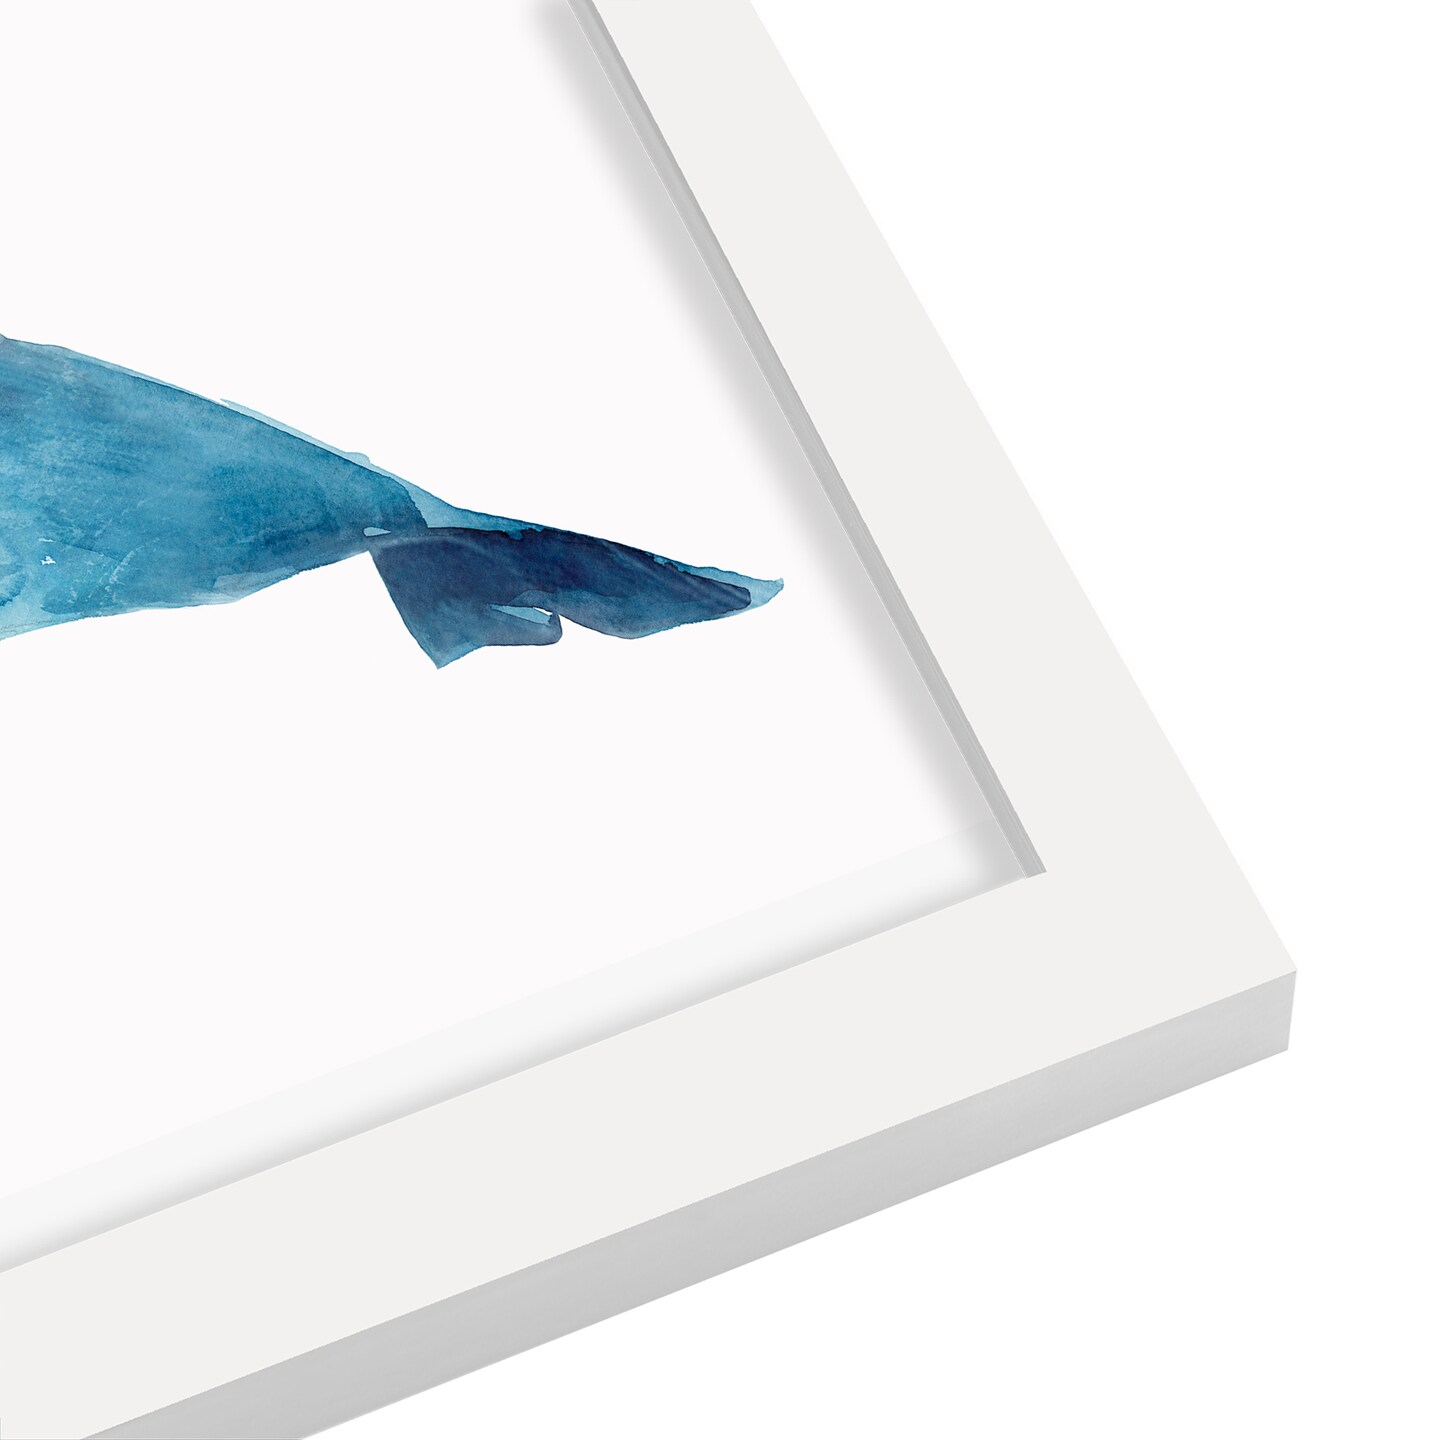 Whale by Pi Creative Art Frame  - Americanflat